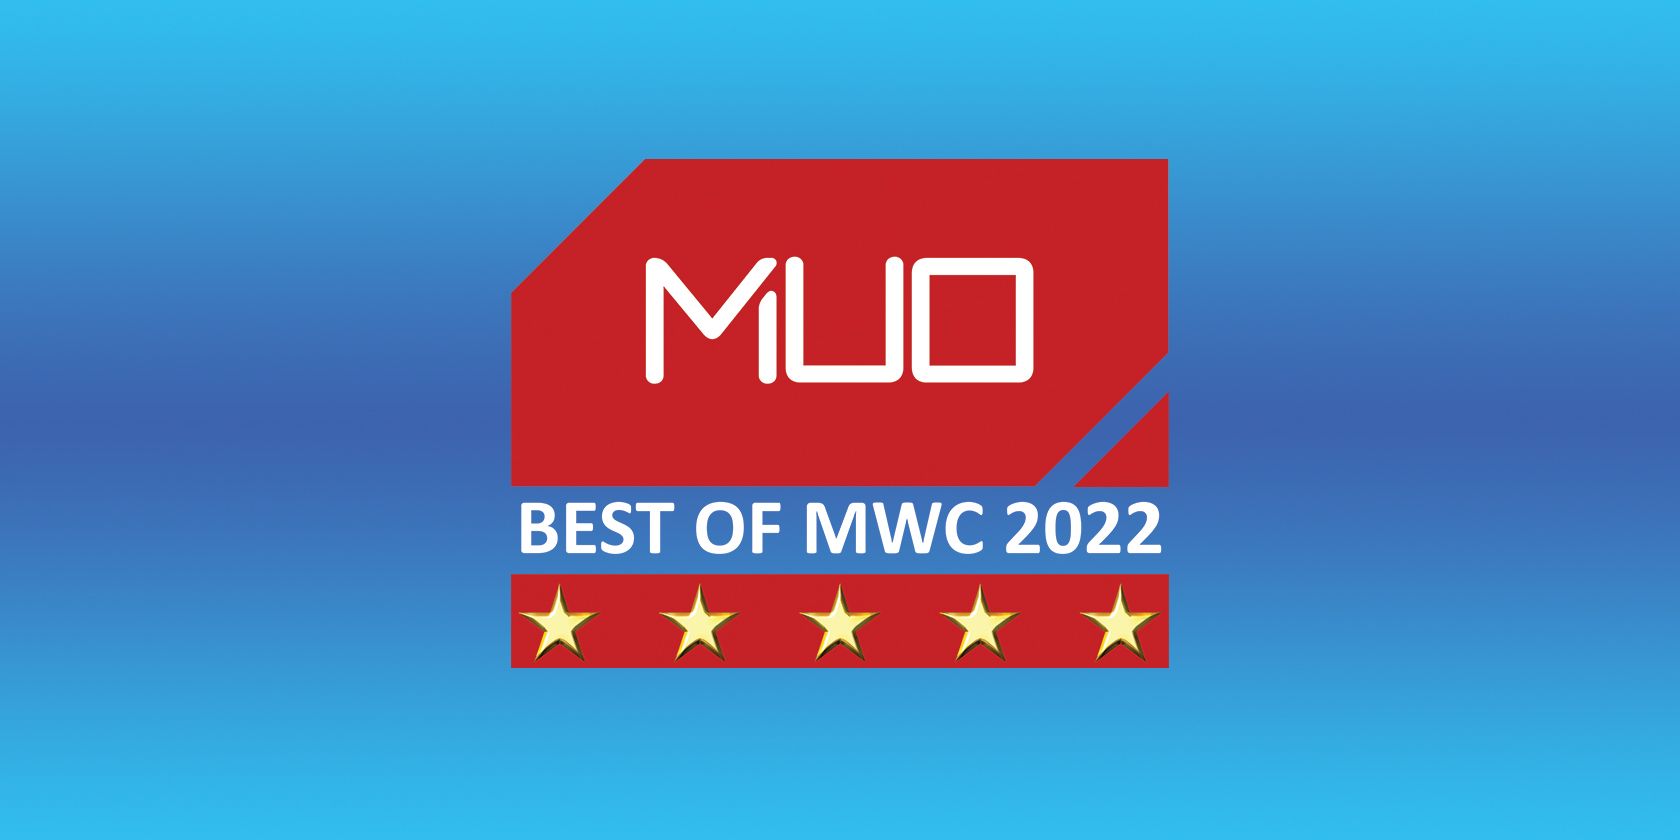 muo-mwc-2022-awards